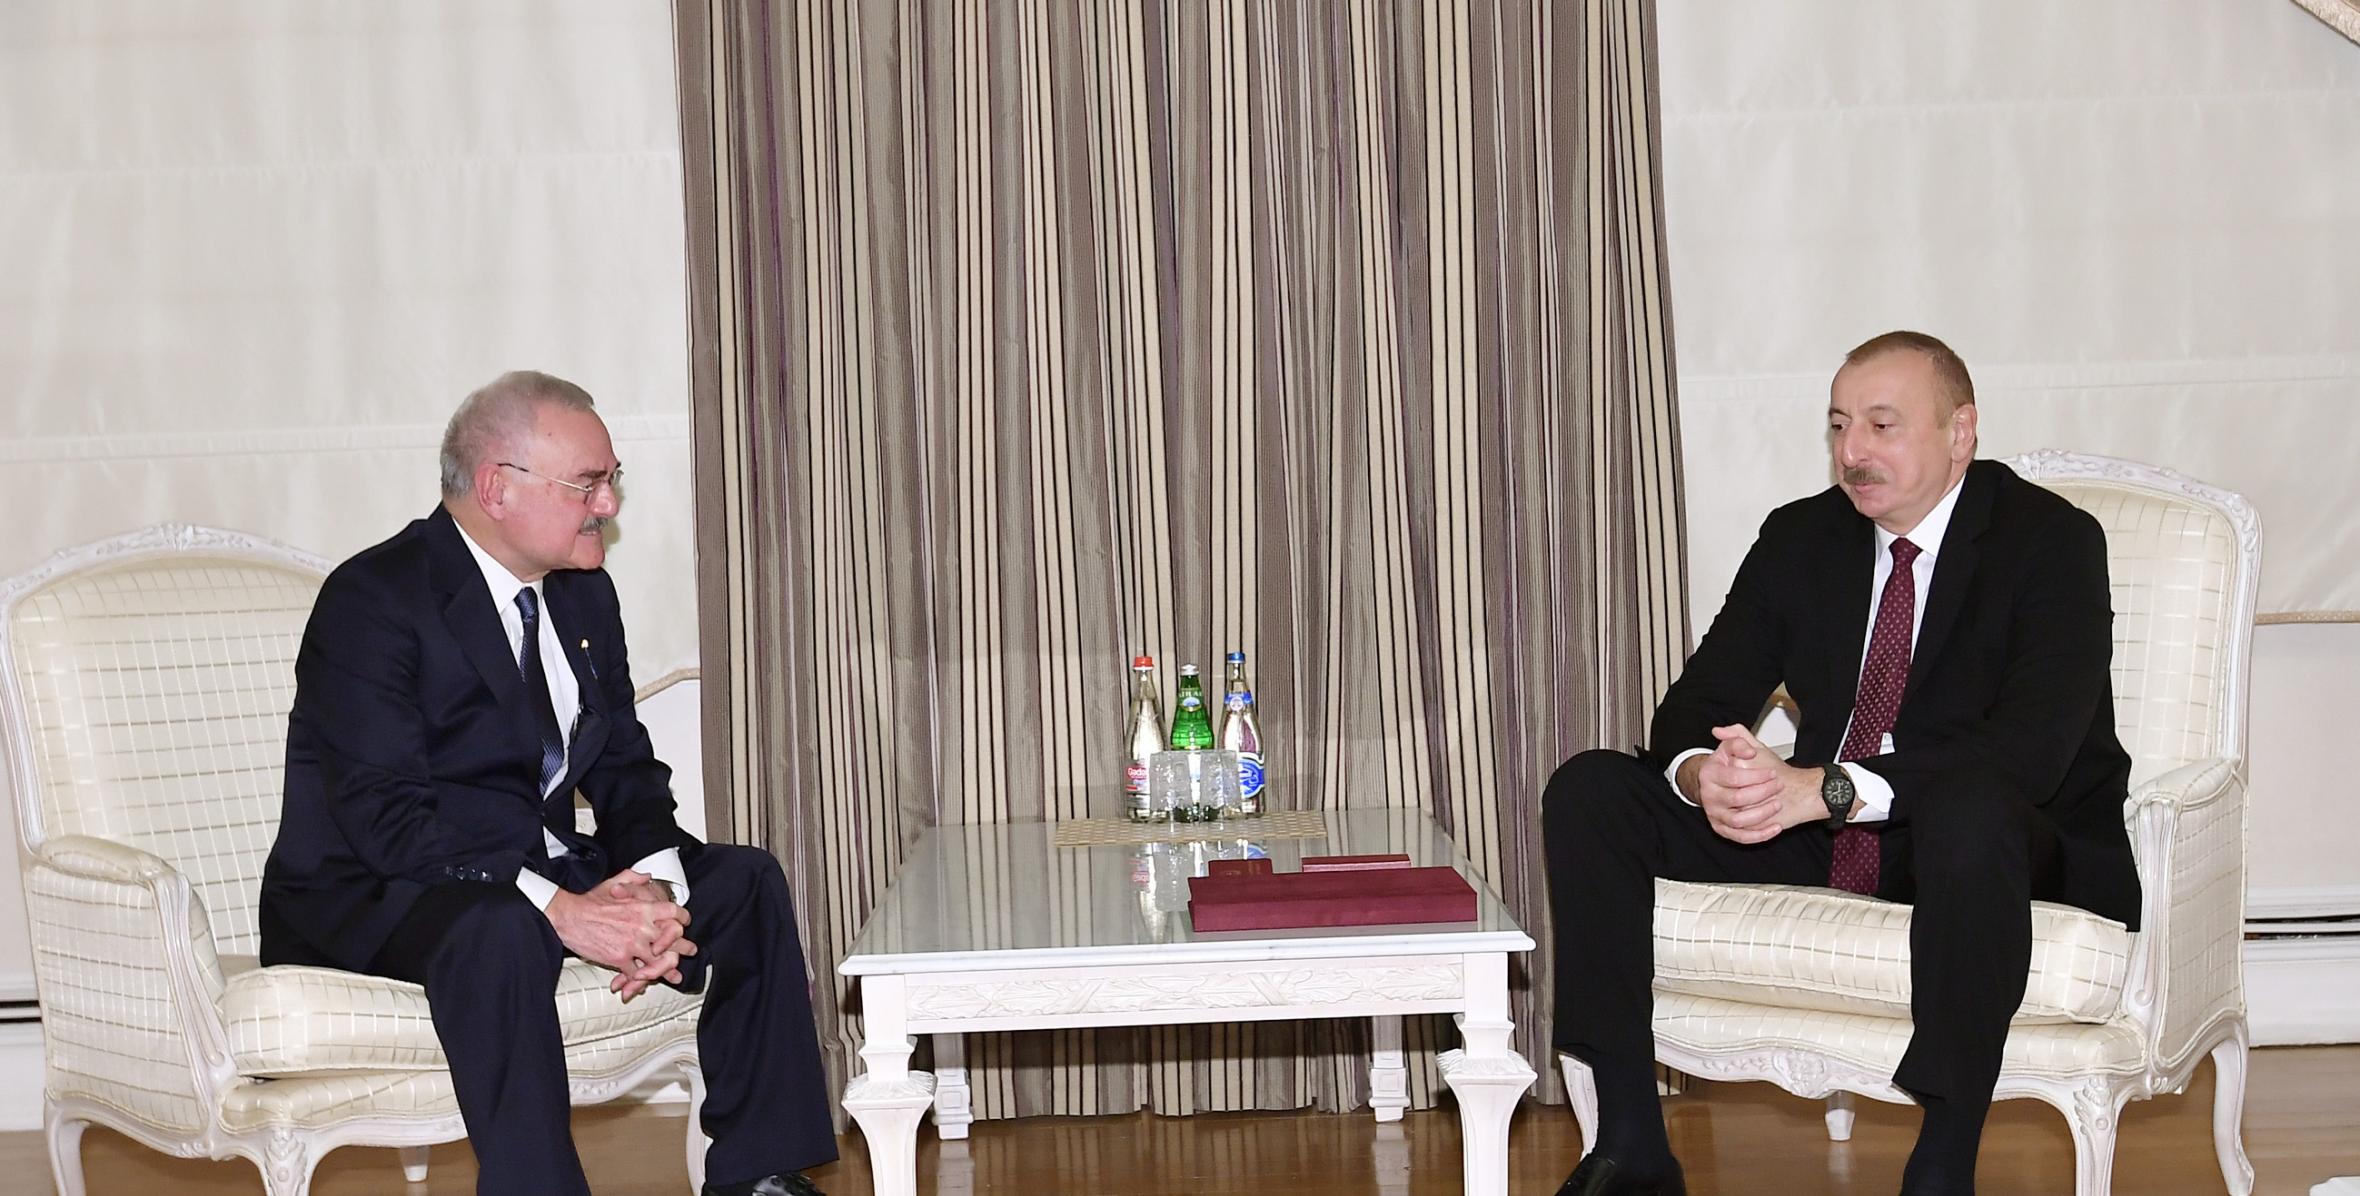 Ilham Aliyev presented Order “For Service to Motherland” 1st Class to Artur Rasizade